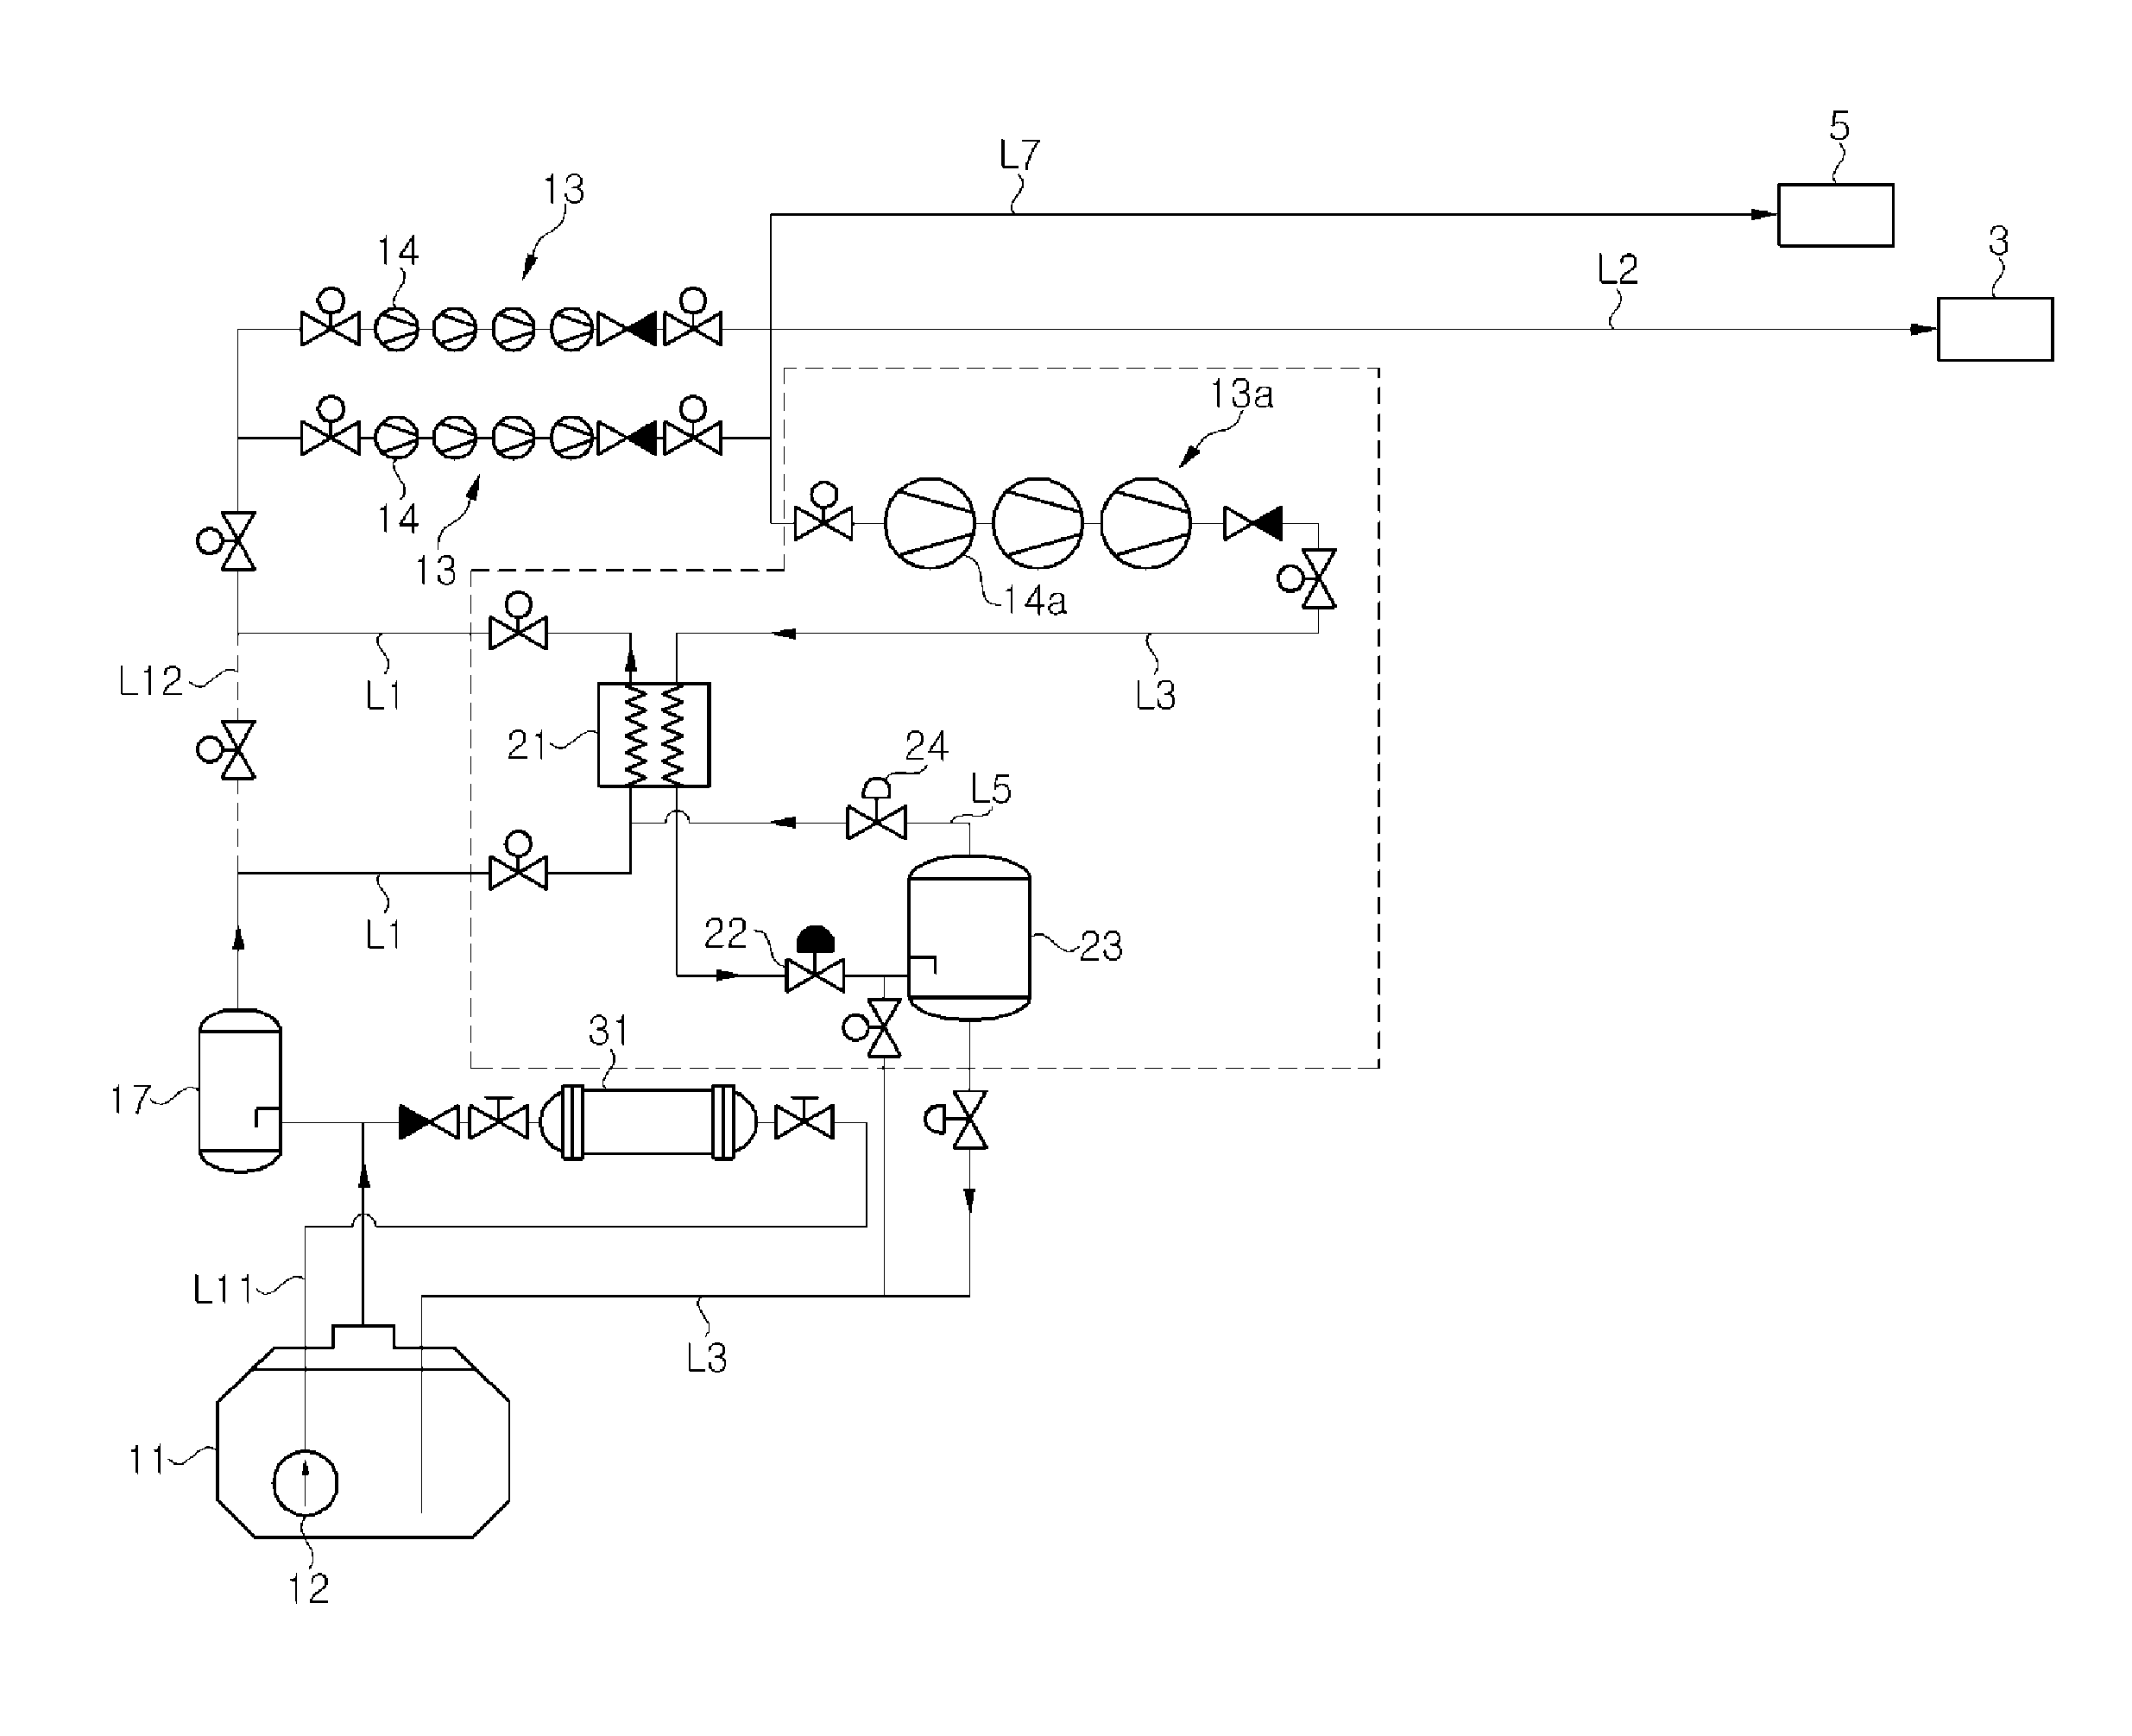 System and method for treating boil-off gas in ship